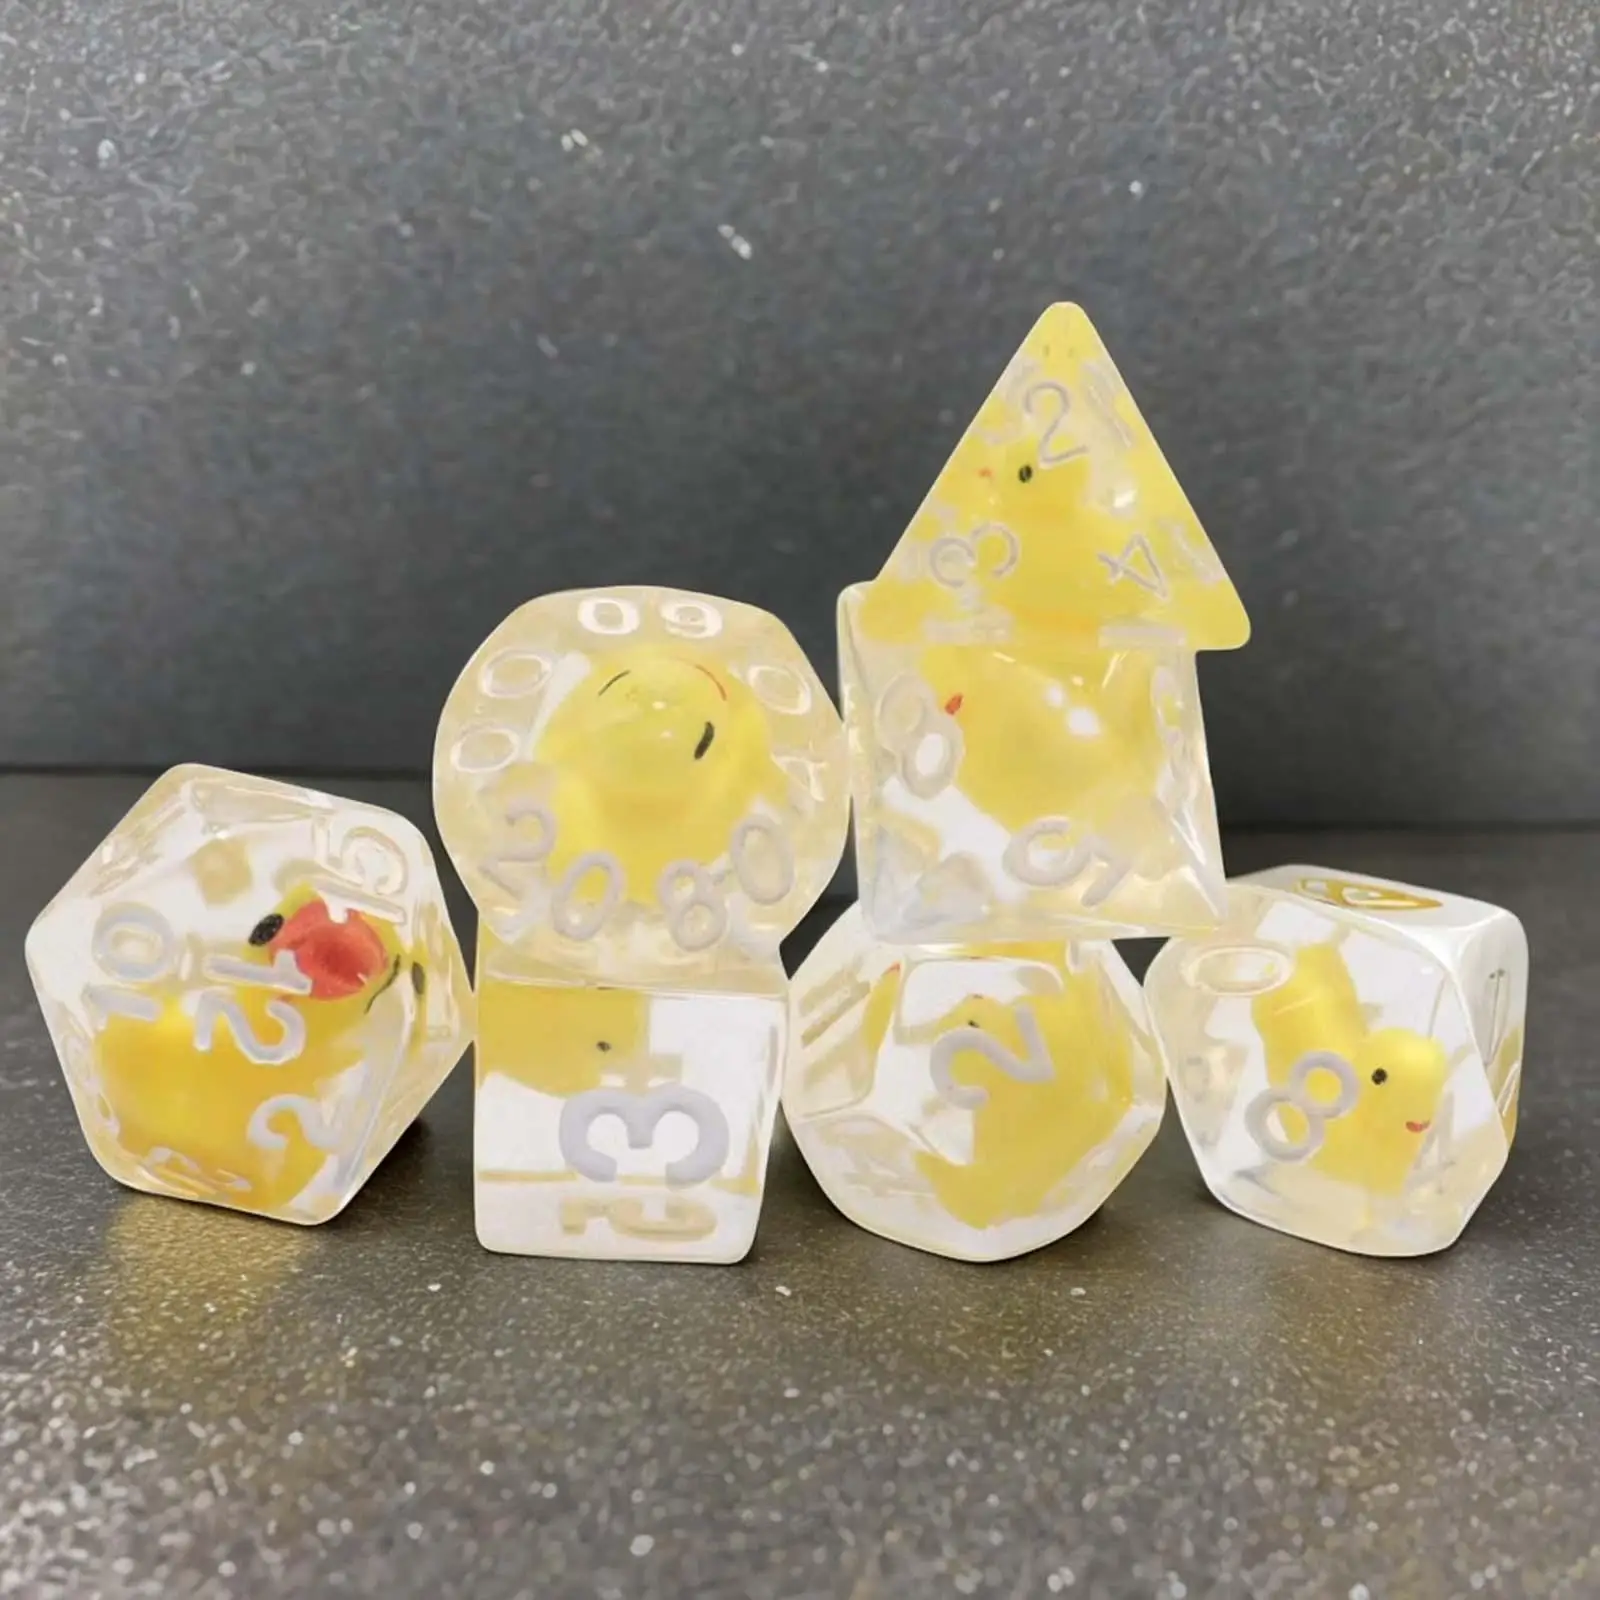 7 Pieces Multi Sided Dices Role Playing Game Dices Polyhedral Dices Set for Party KTV Table Game Role Playing Game Board Game